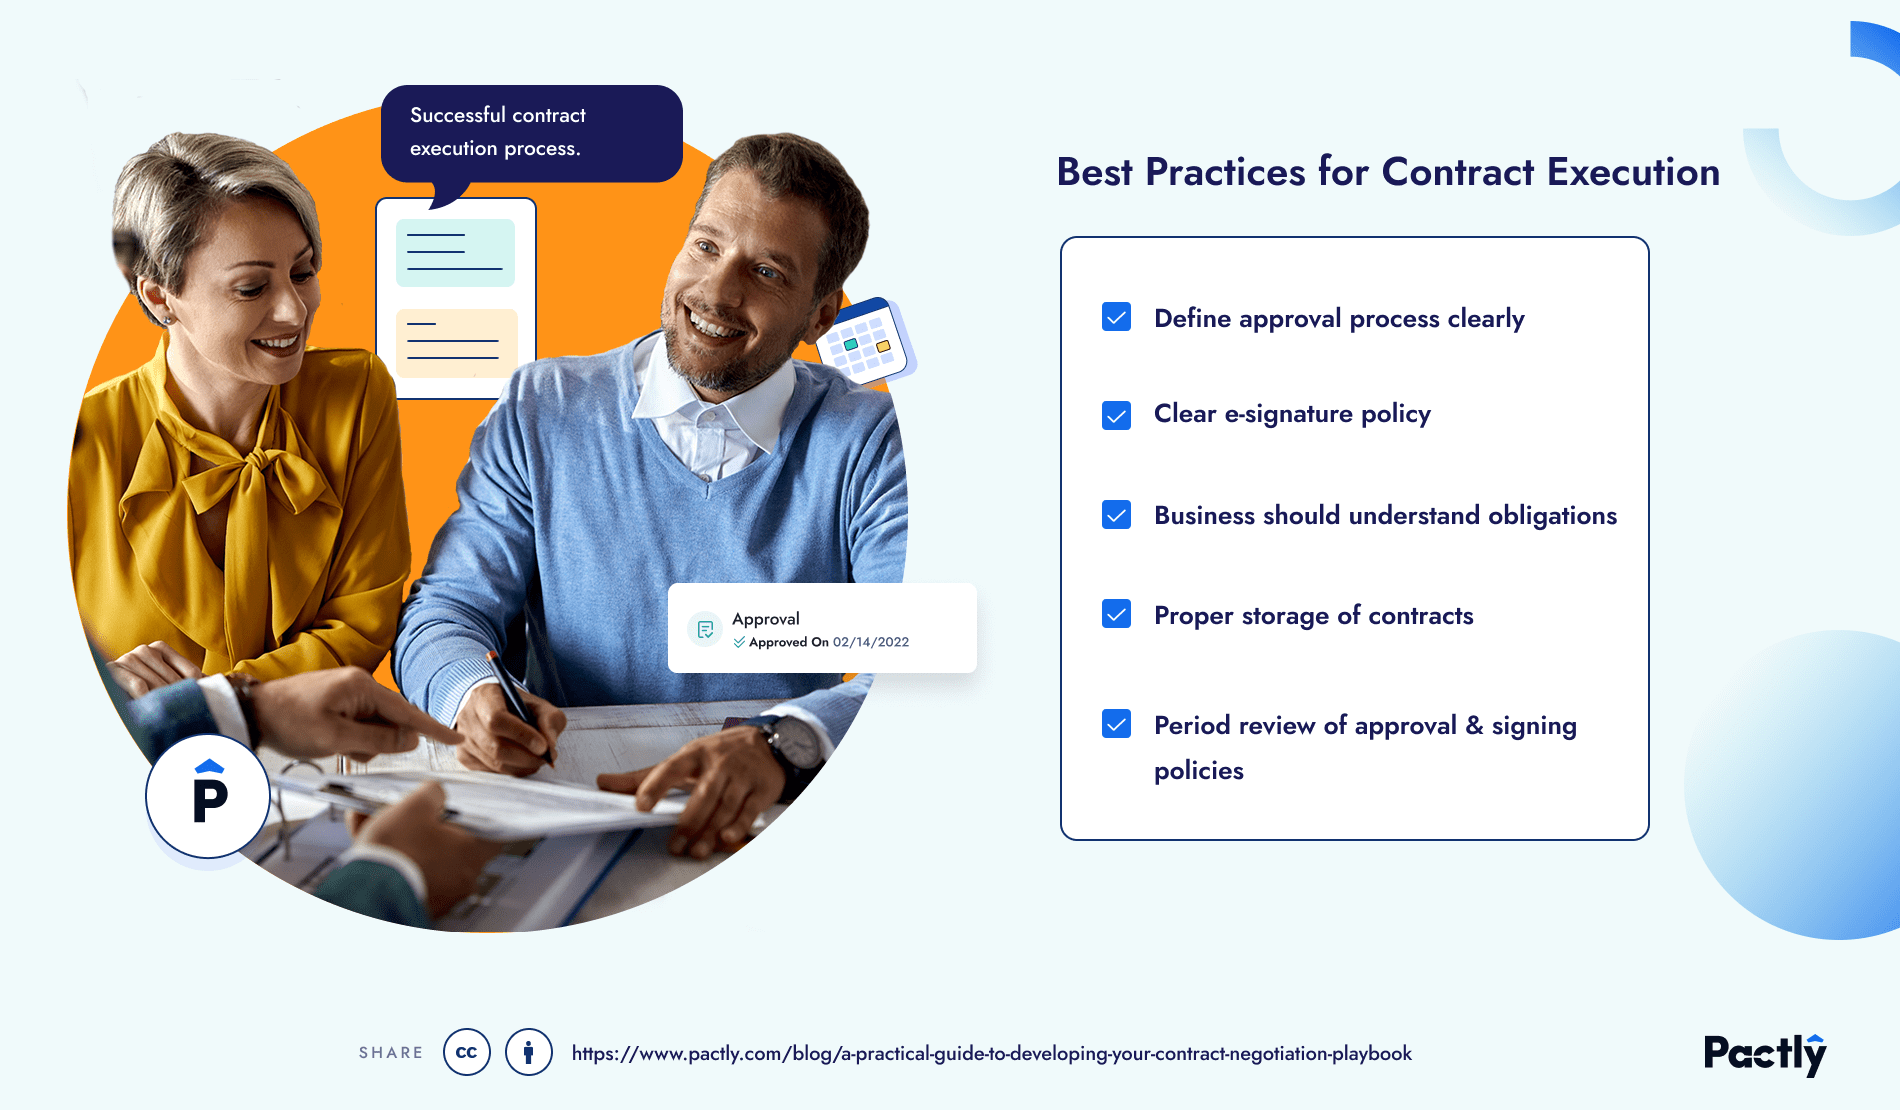 Best practices for contract execution